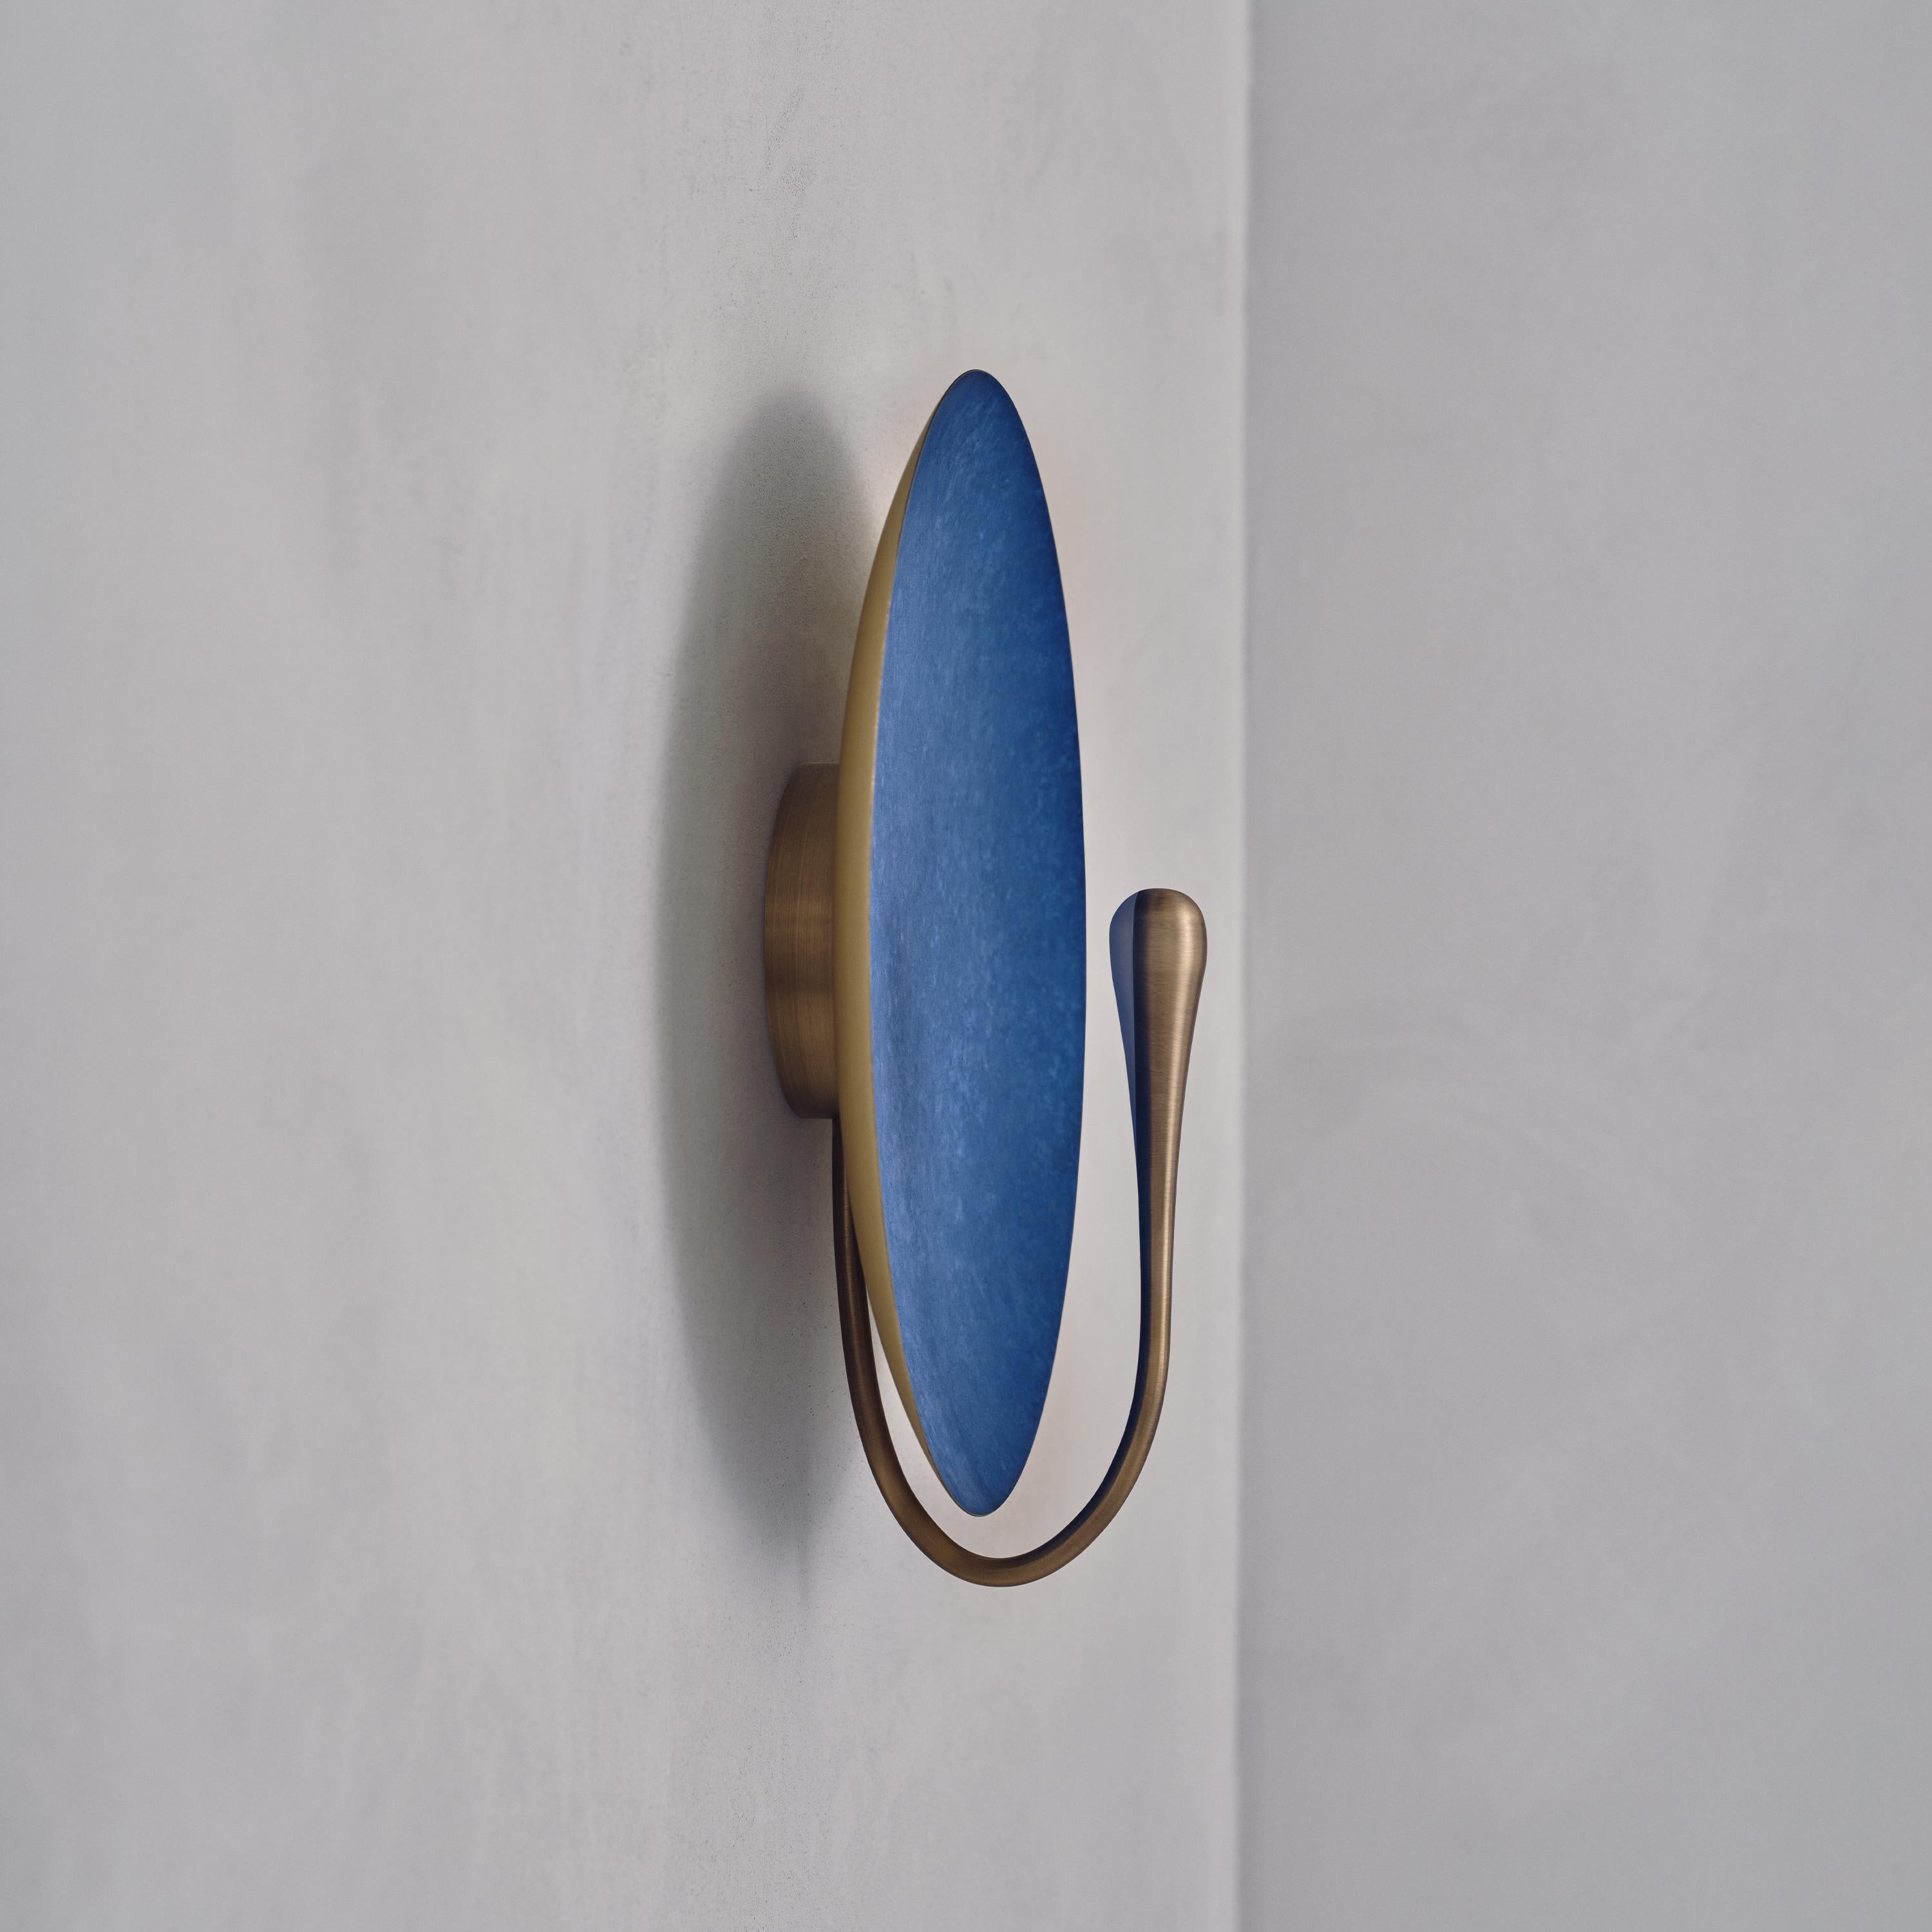 Brushed 'Cosmic Azure' Indigo Blue Patina Brass Contemporary Wall Light, Sconce For Sale